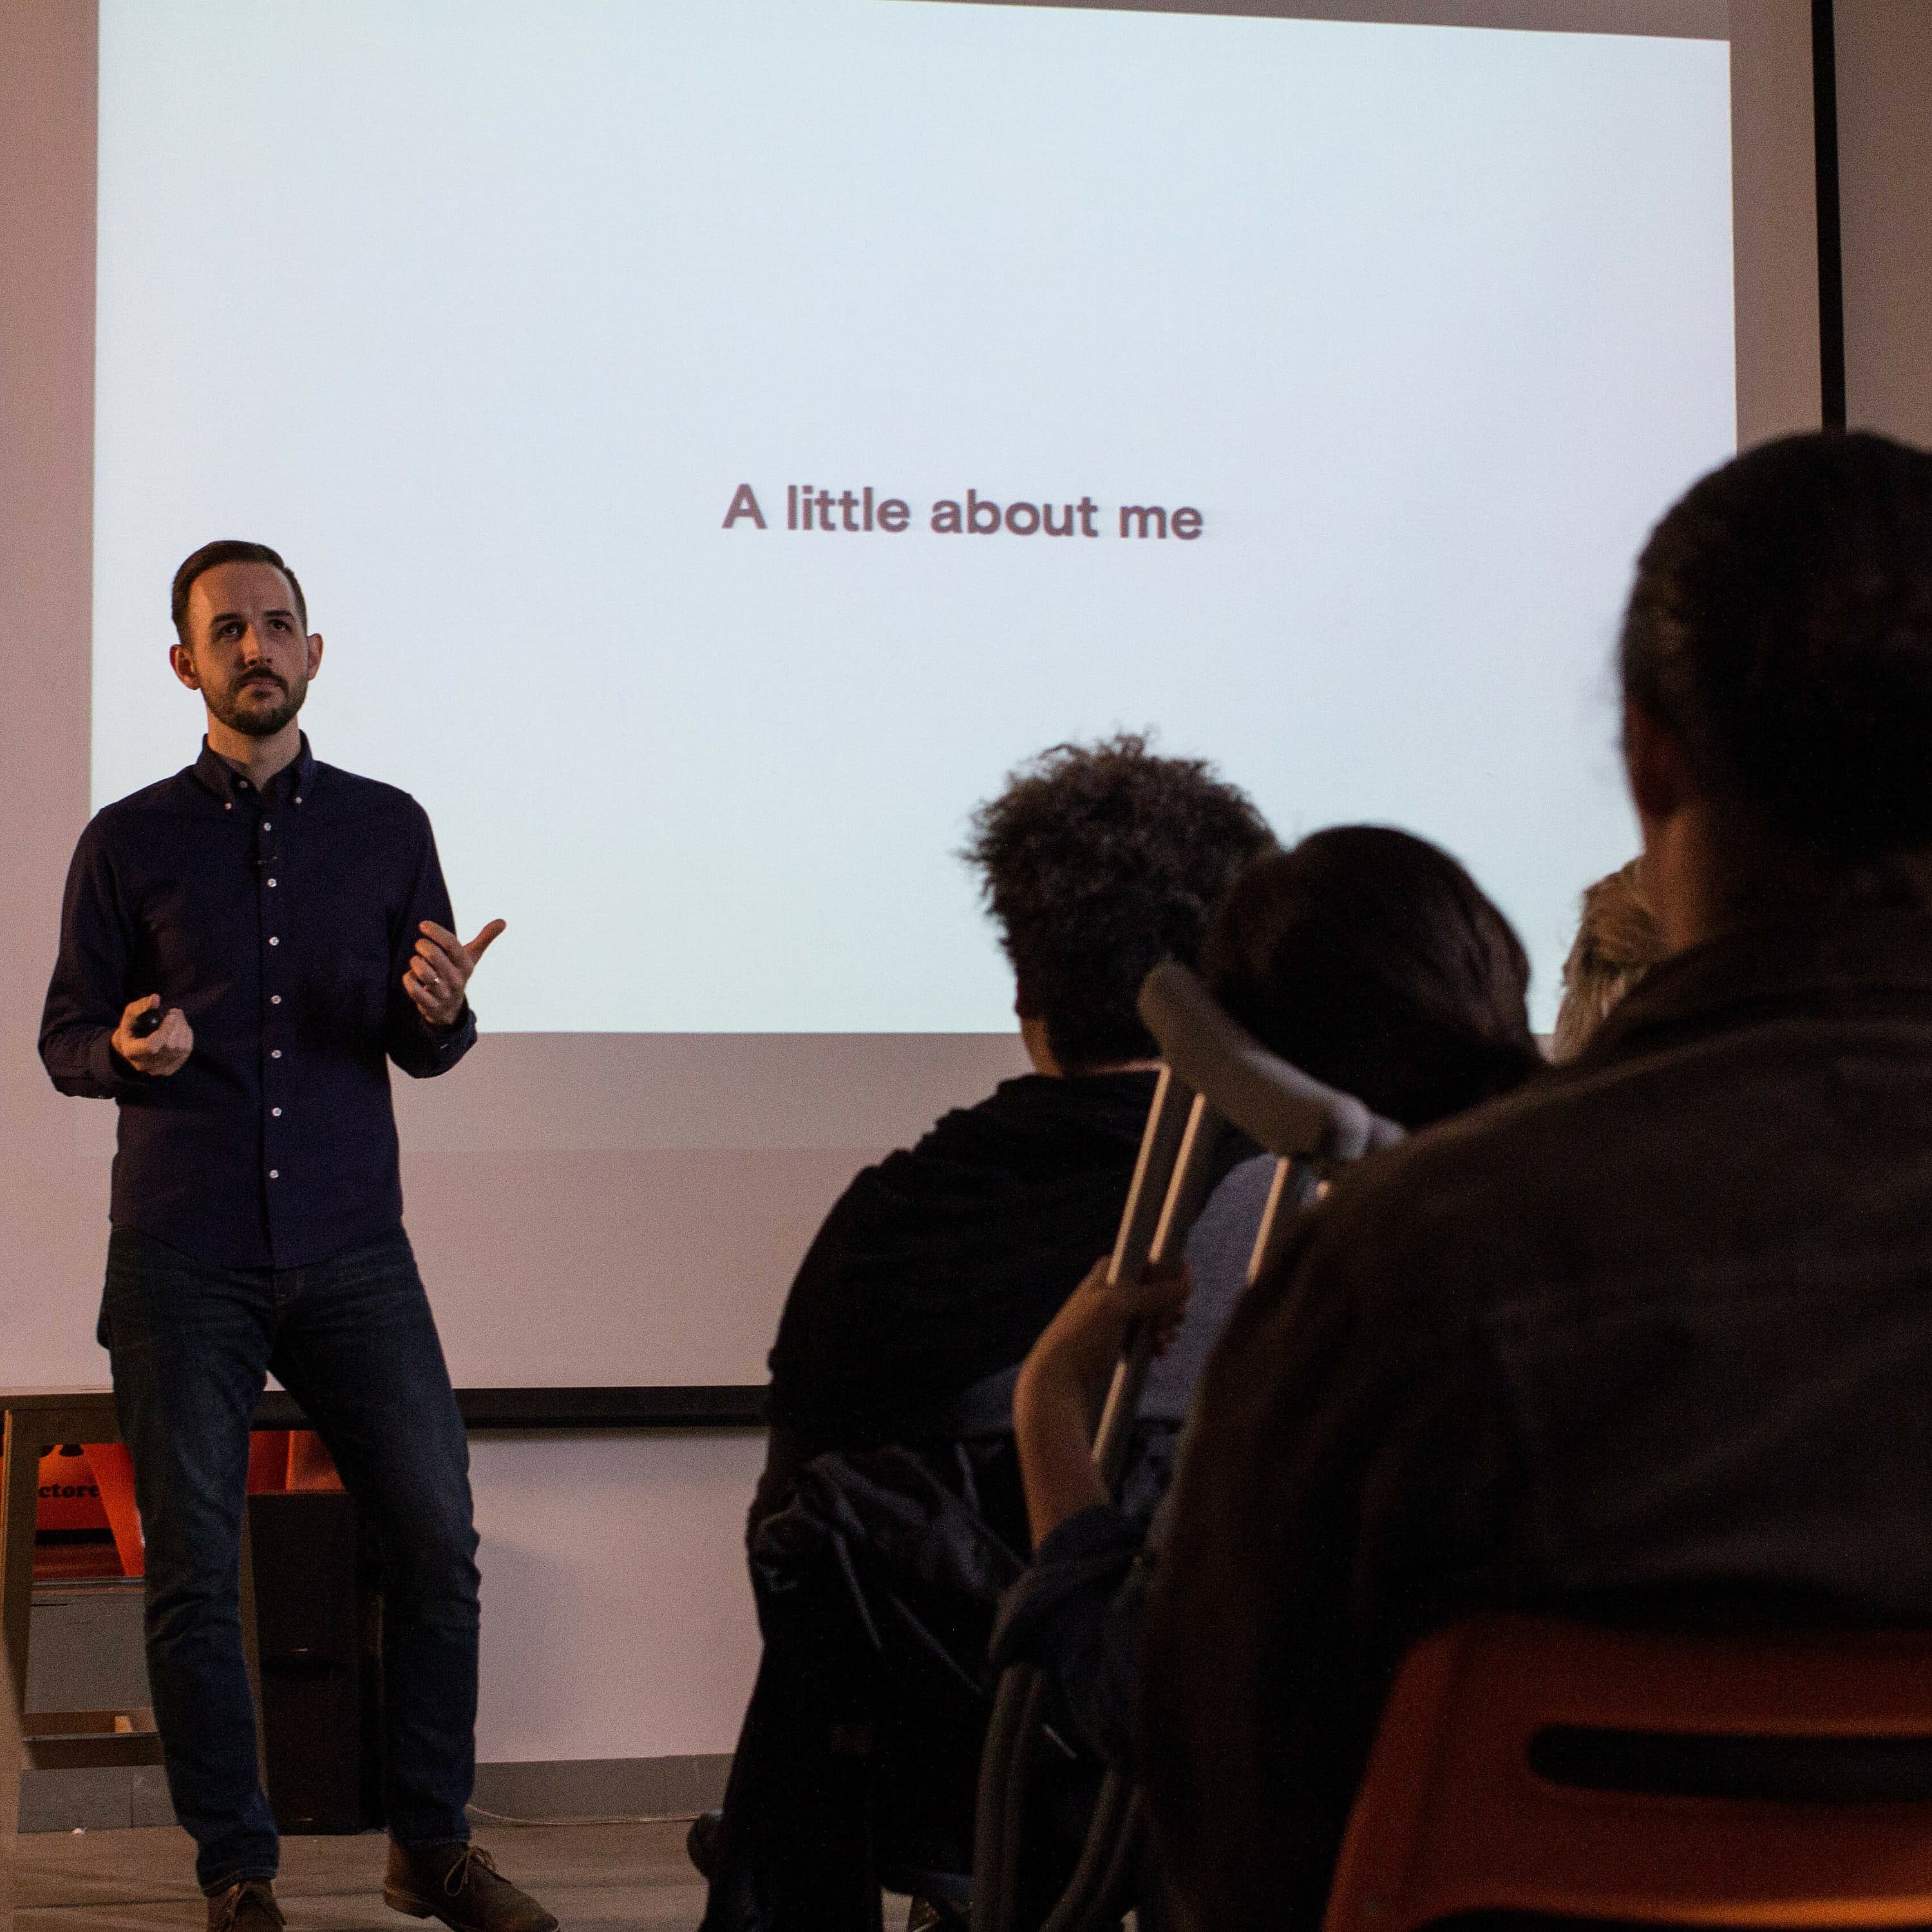 A person stands in front of a screen displaying the text "A little about me," giving a presentation to an audience seated in a room. The presenter, dressed in a dark shirt and jeans, gestures with one hand while holding a remote in the other.